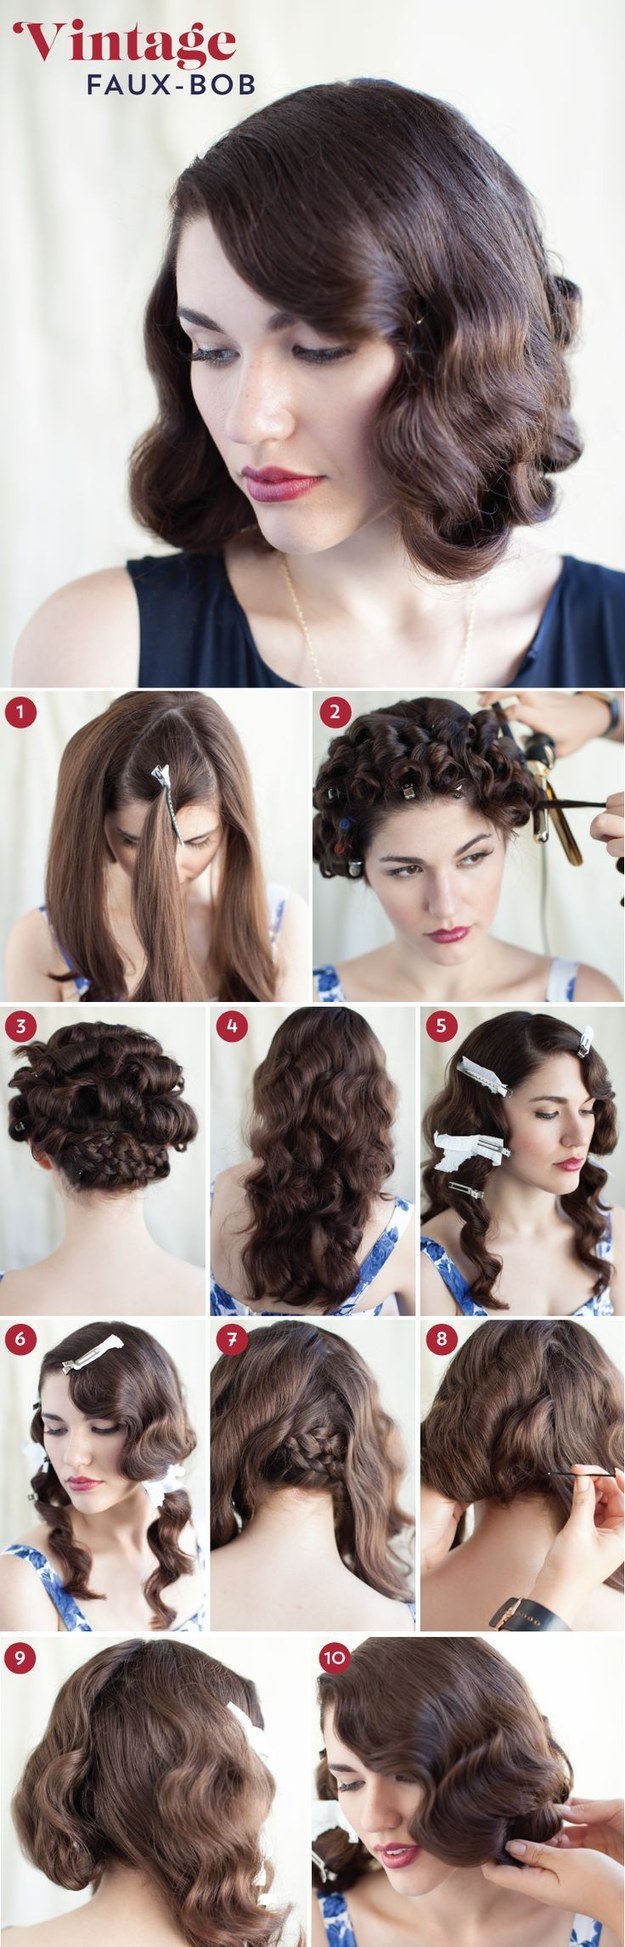 32 Vintage Hairstyle Tutorials You Should Not Miss Styles Weekly